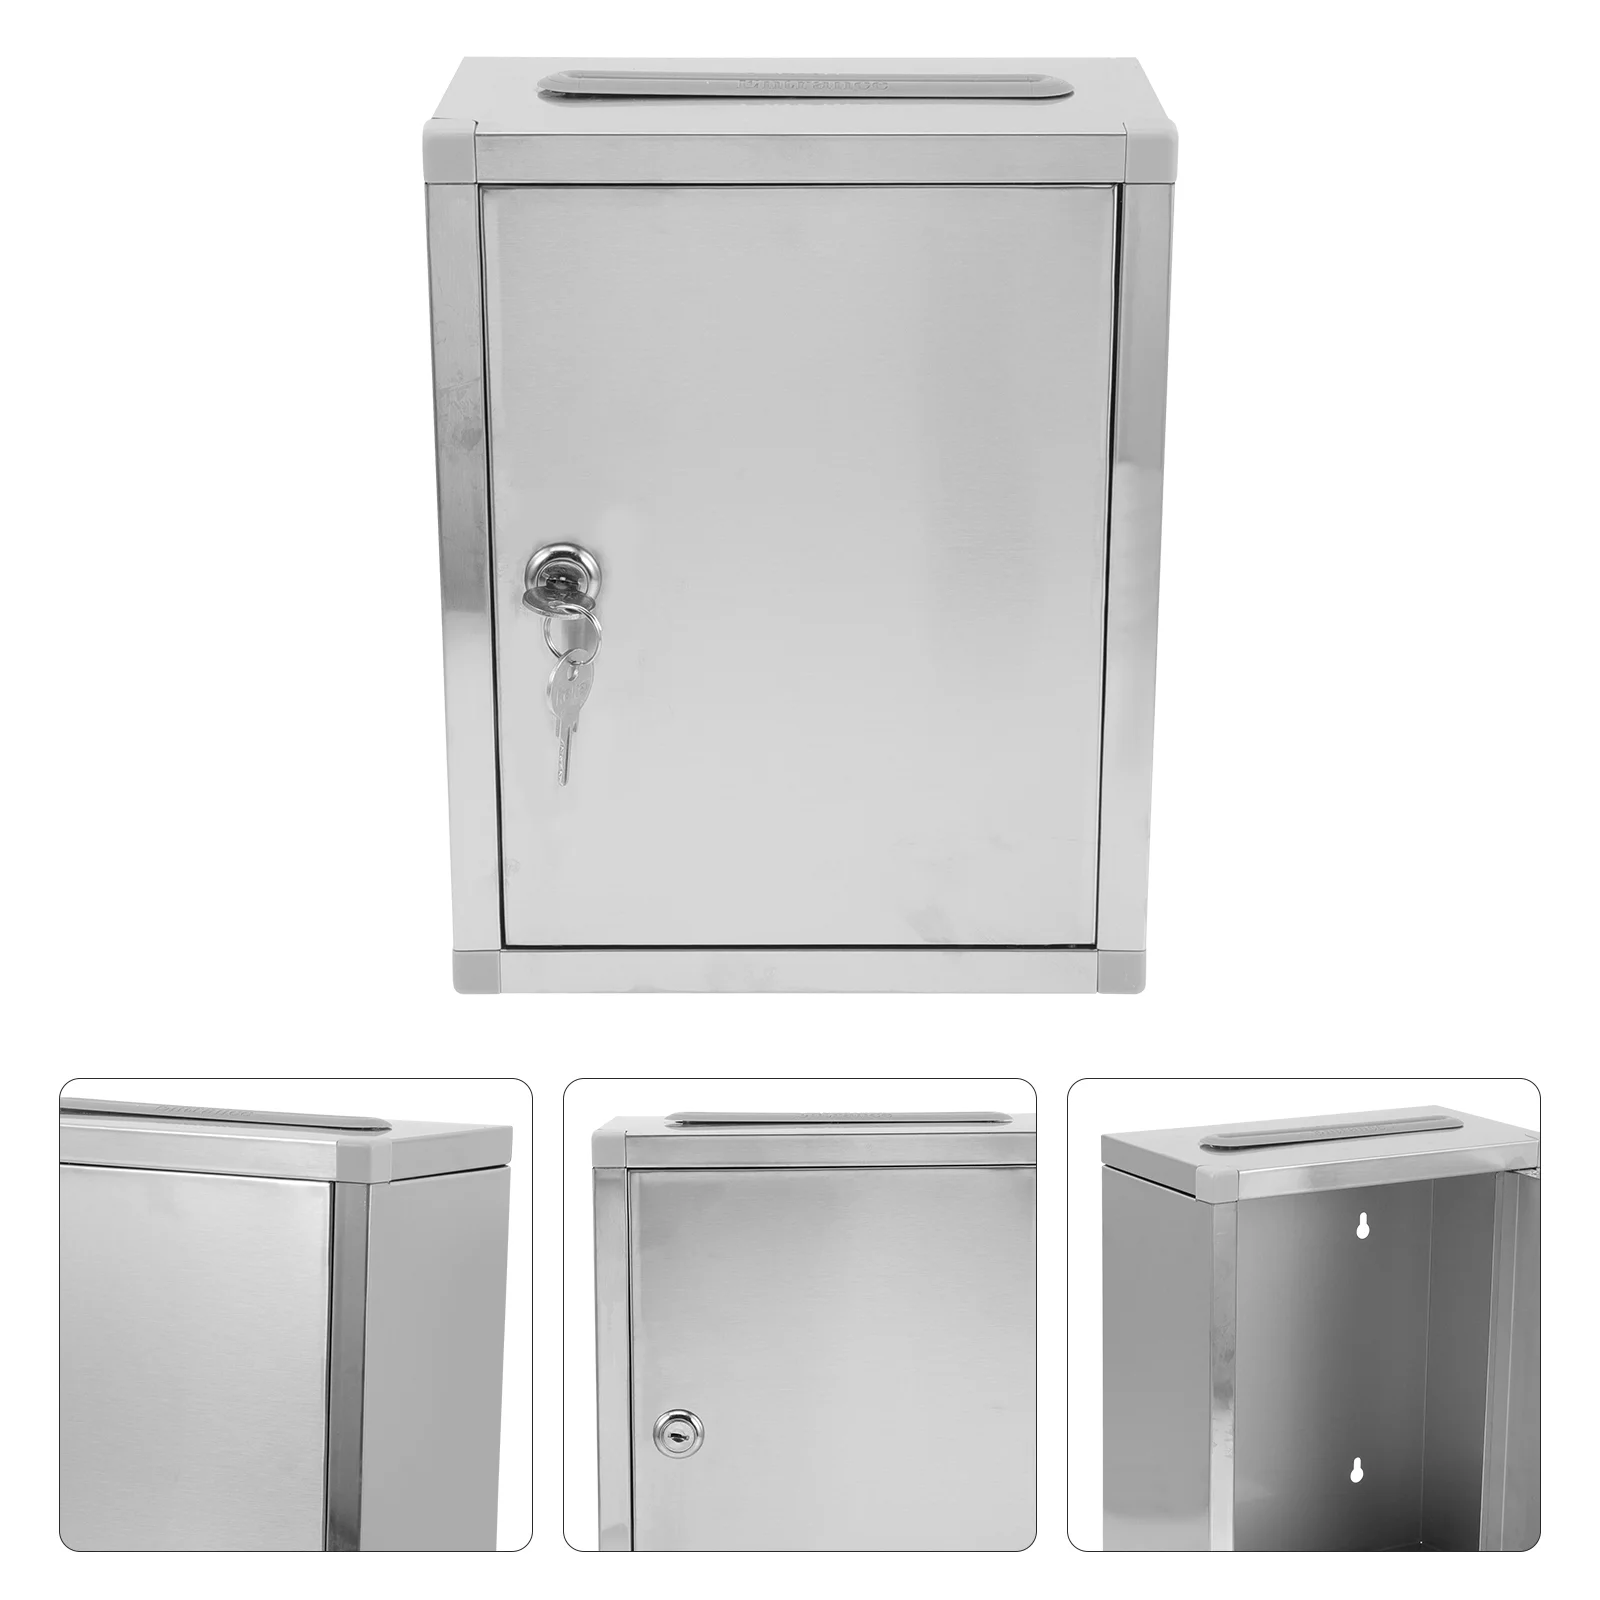 Wall Drop Box Donation Ballot Box with Lock Mailbox Letter Post Box Complaint Suggestion Comment Box Stainless Steel for Home